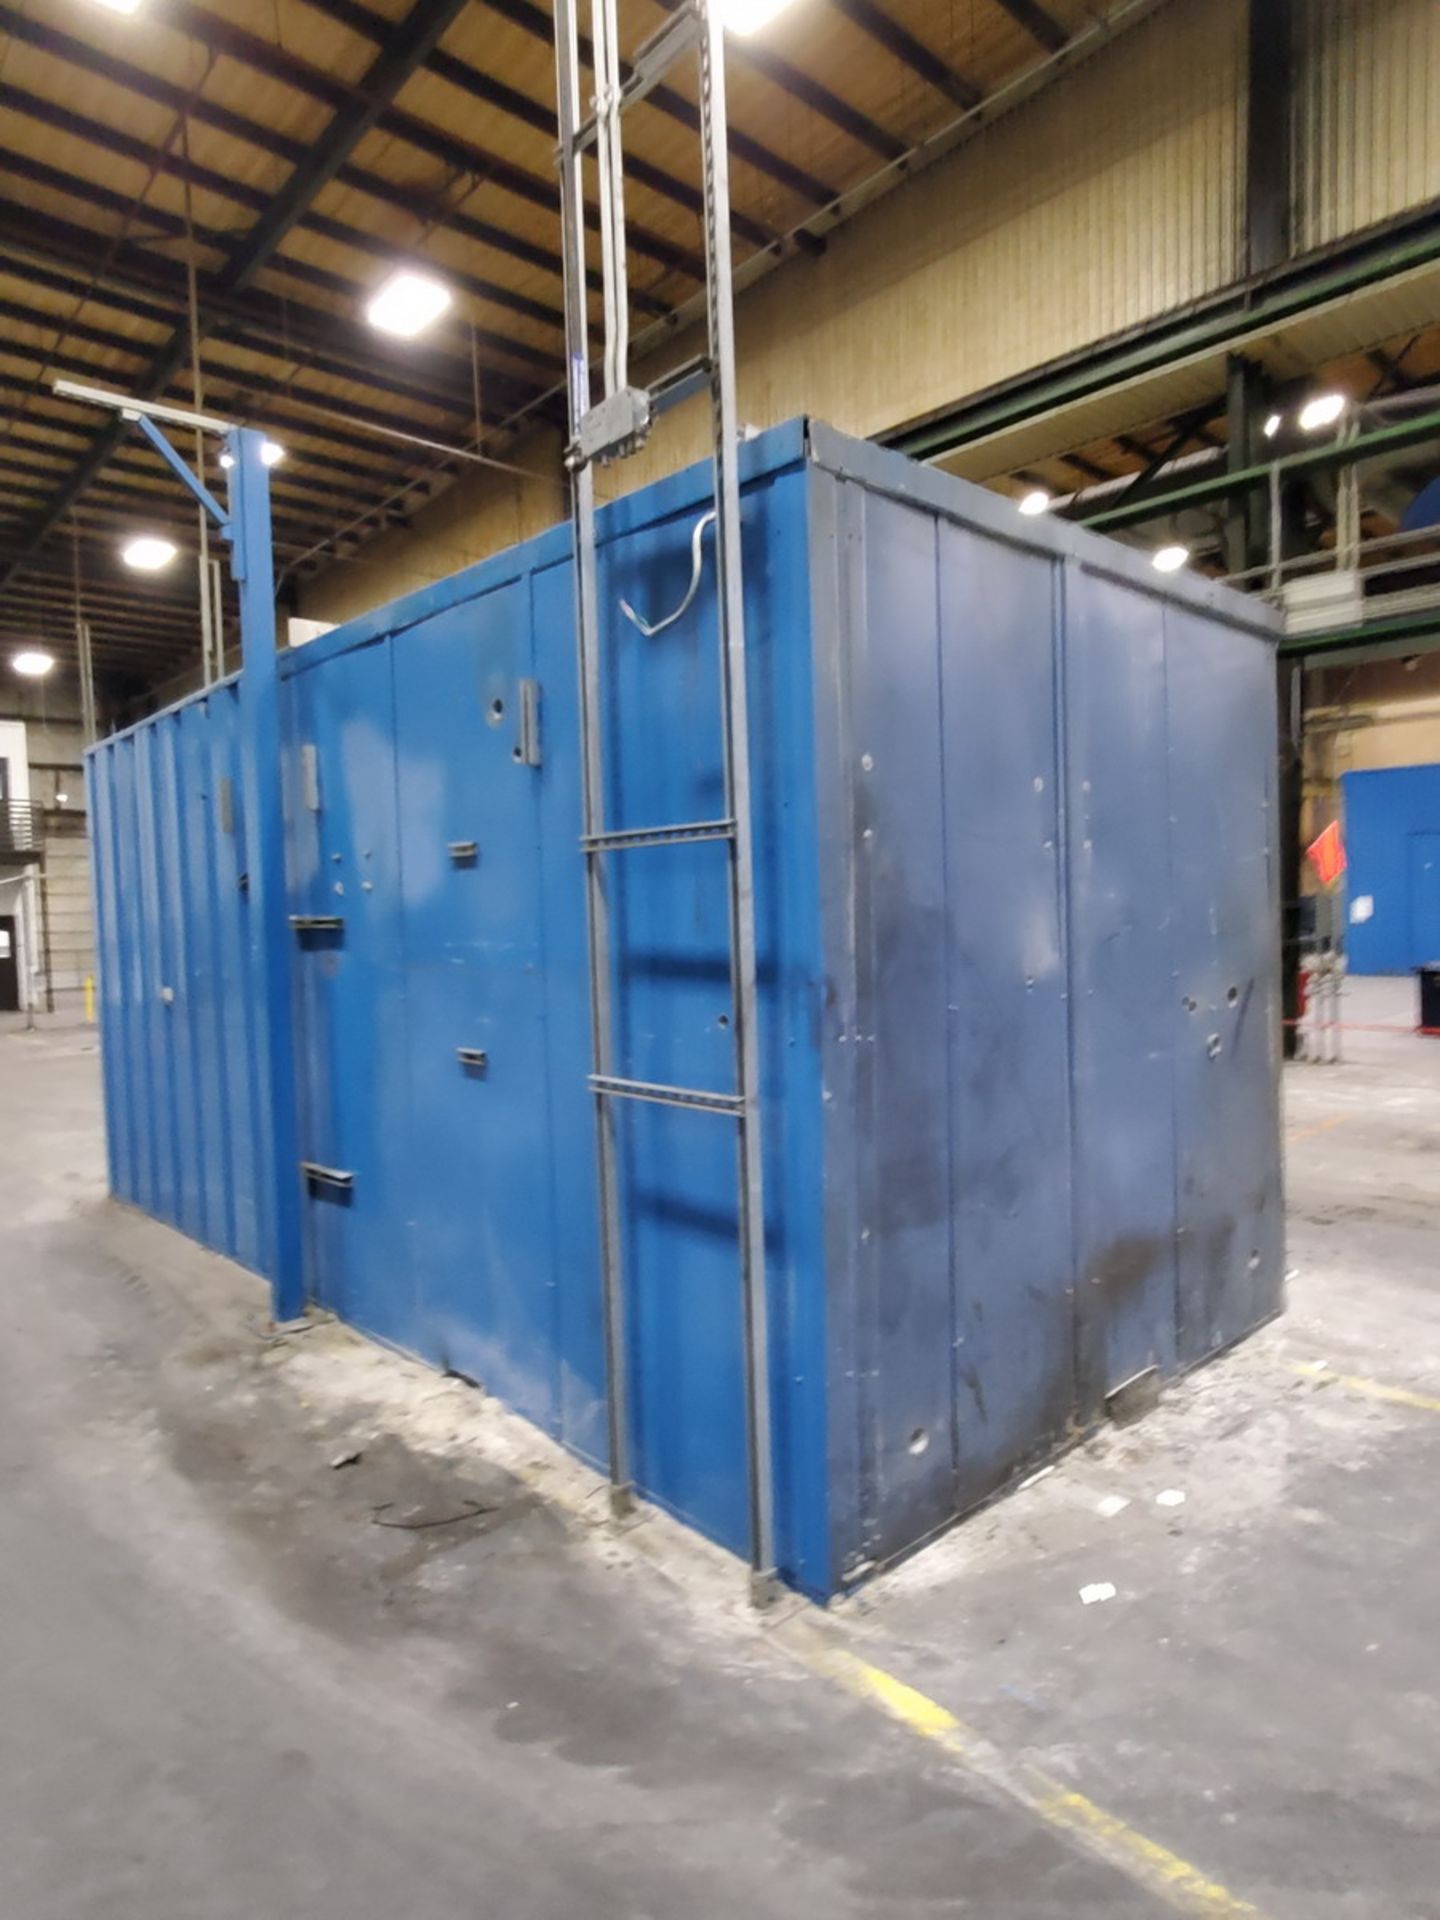 Welding Booth (Conduit Excluded) - Image 6 of 7